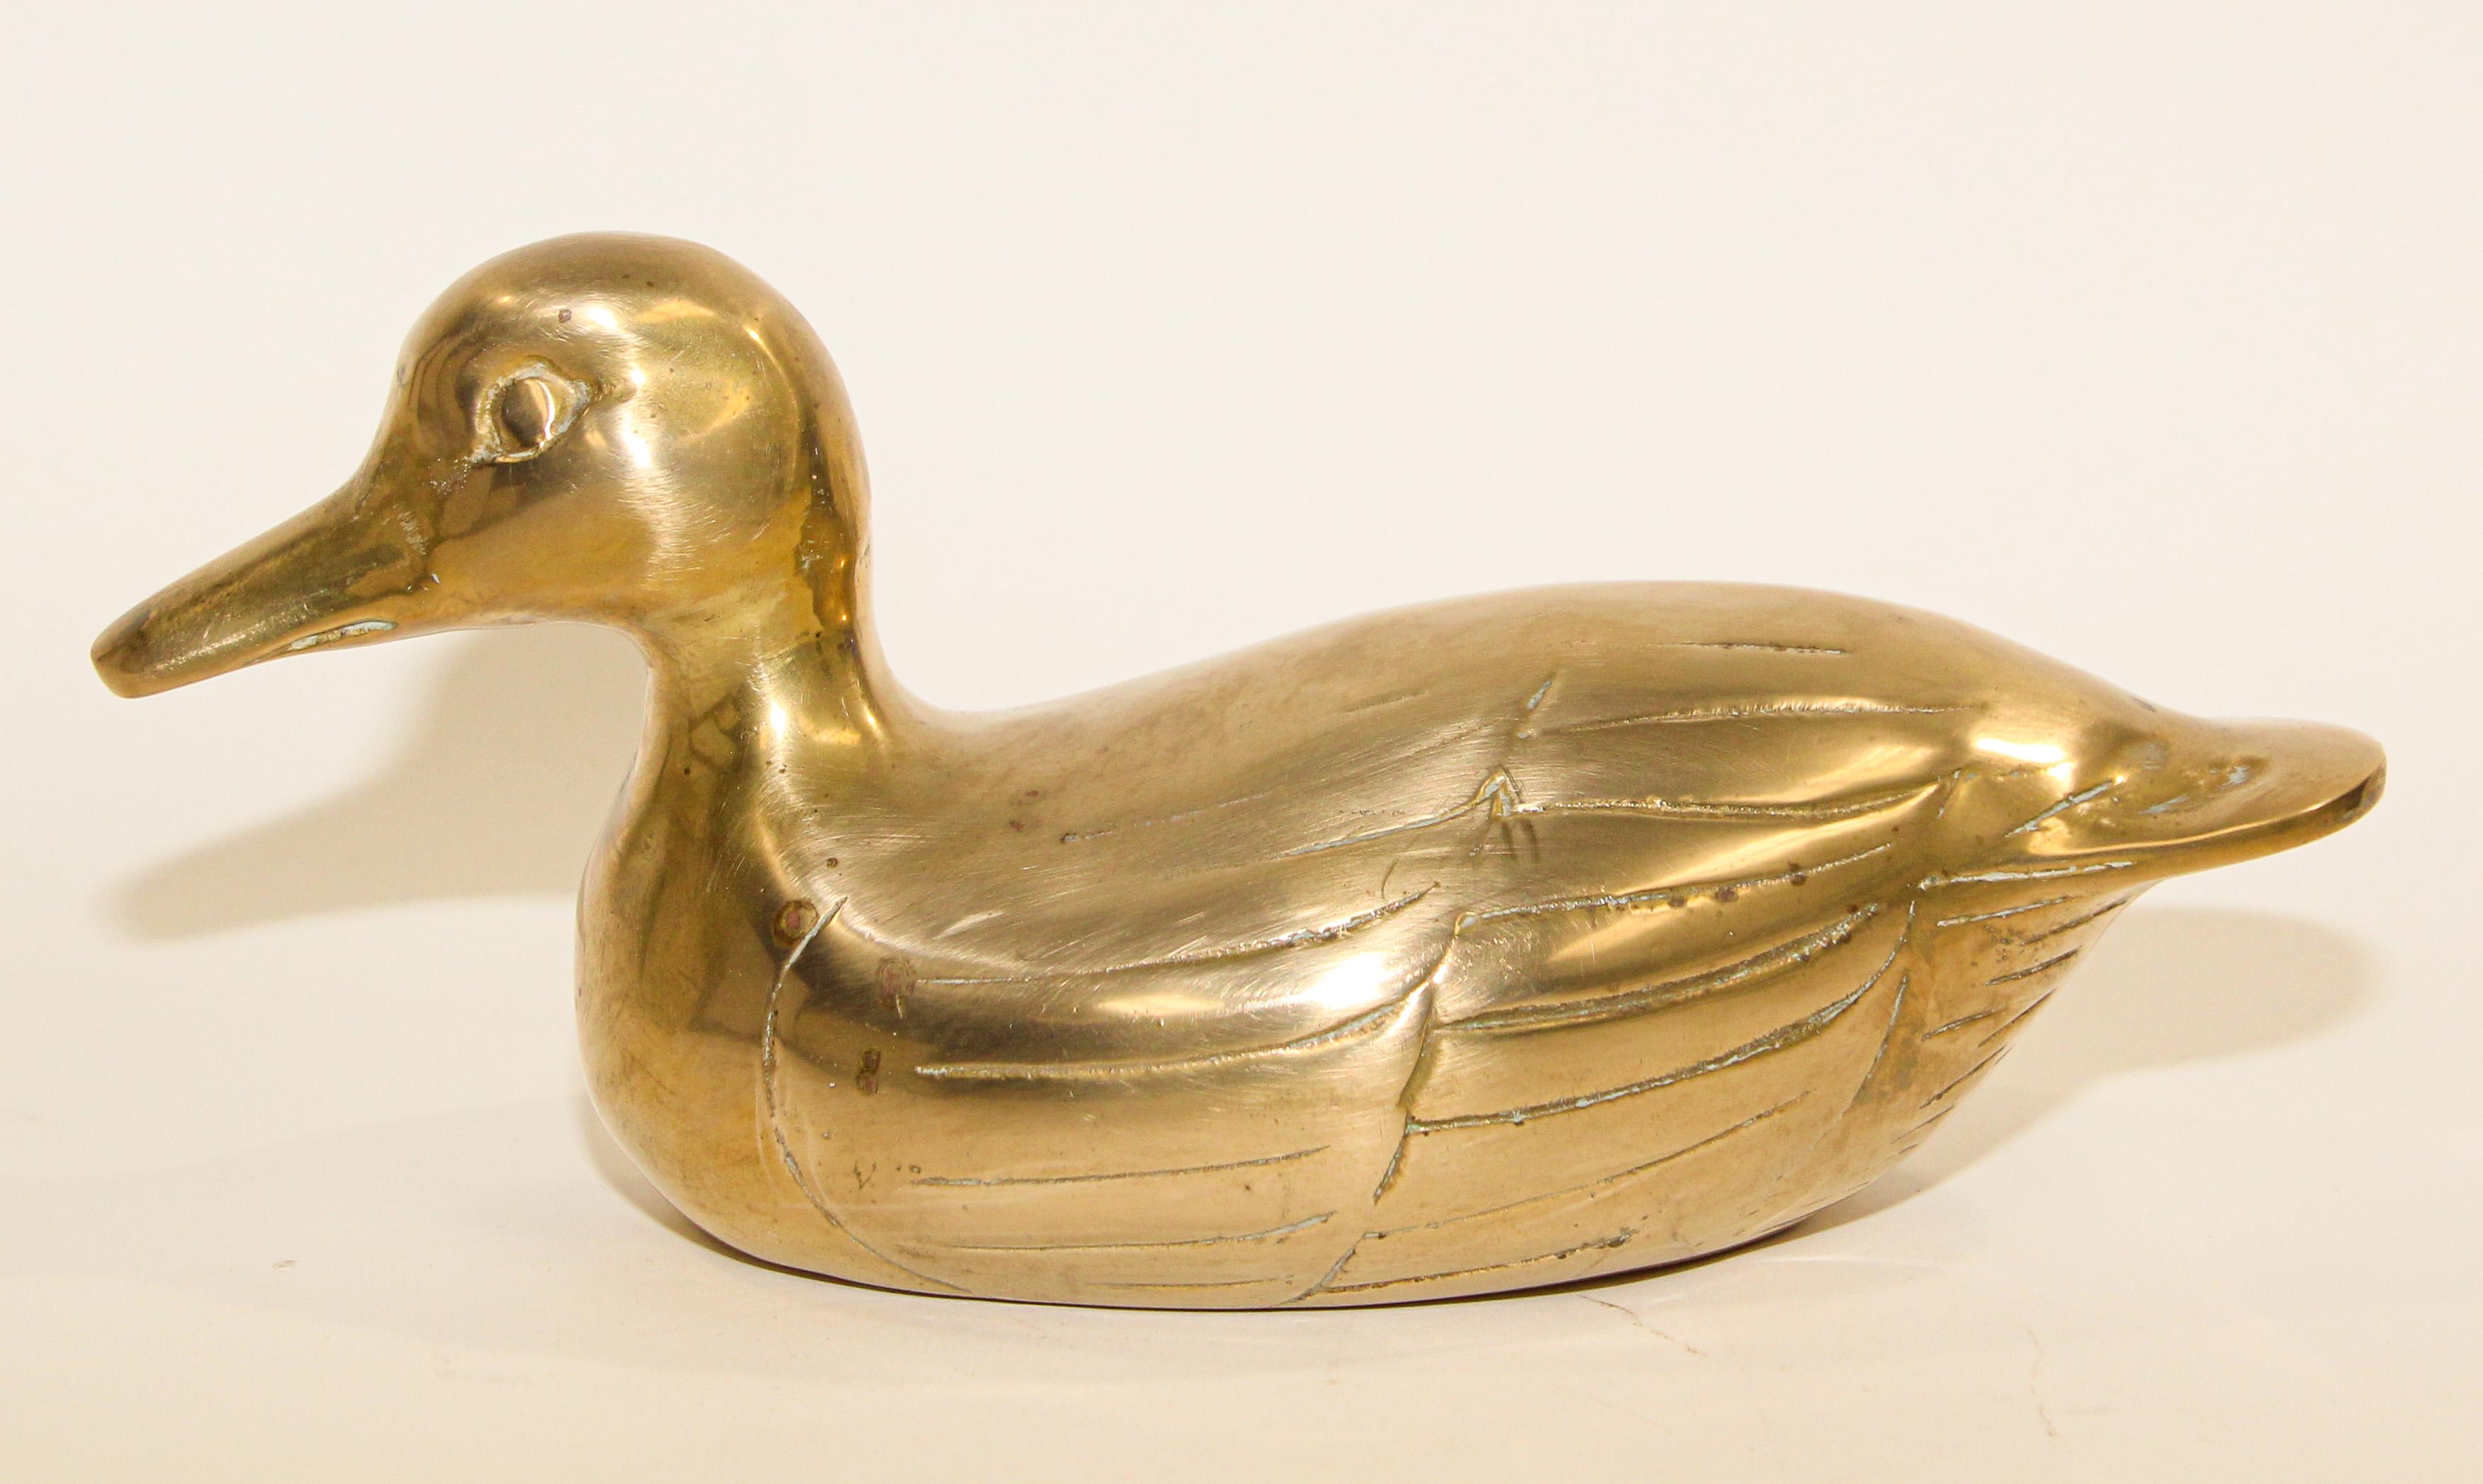 Handcrafted decorative vintage collectible brass duck shape sculpture.
Beautiful handcrafted large cast polished brass bird form.
Vintage large heavy solid brass figural duck.
Midcentury finely detailed solid brass duck form sculpture.